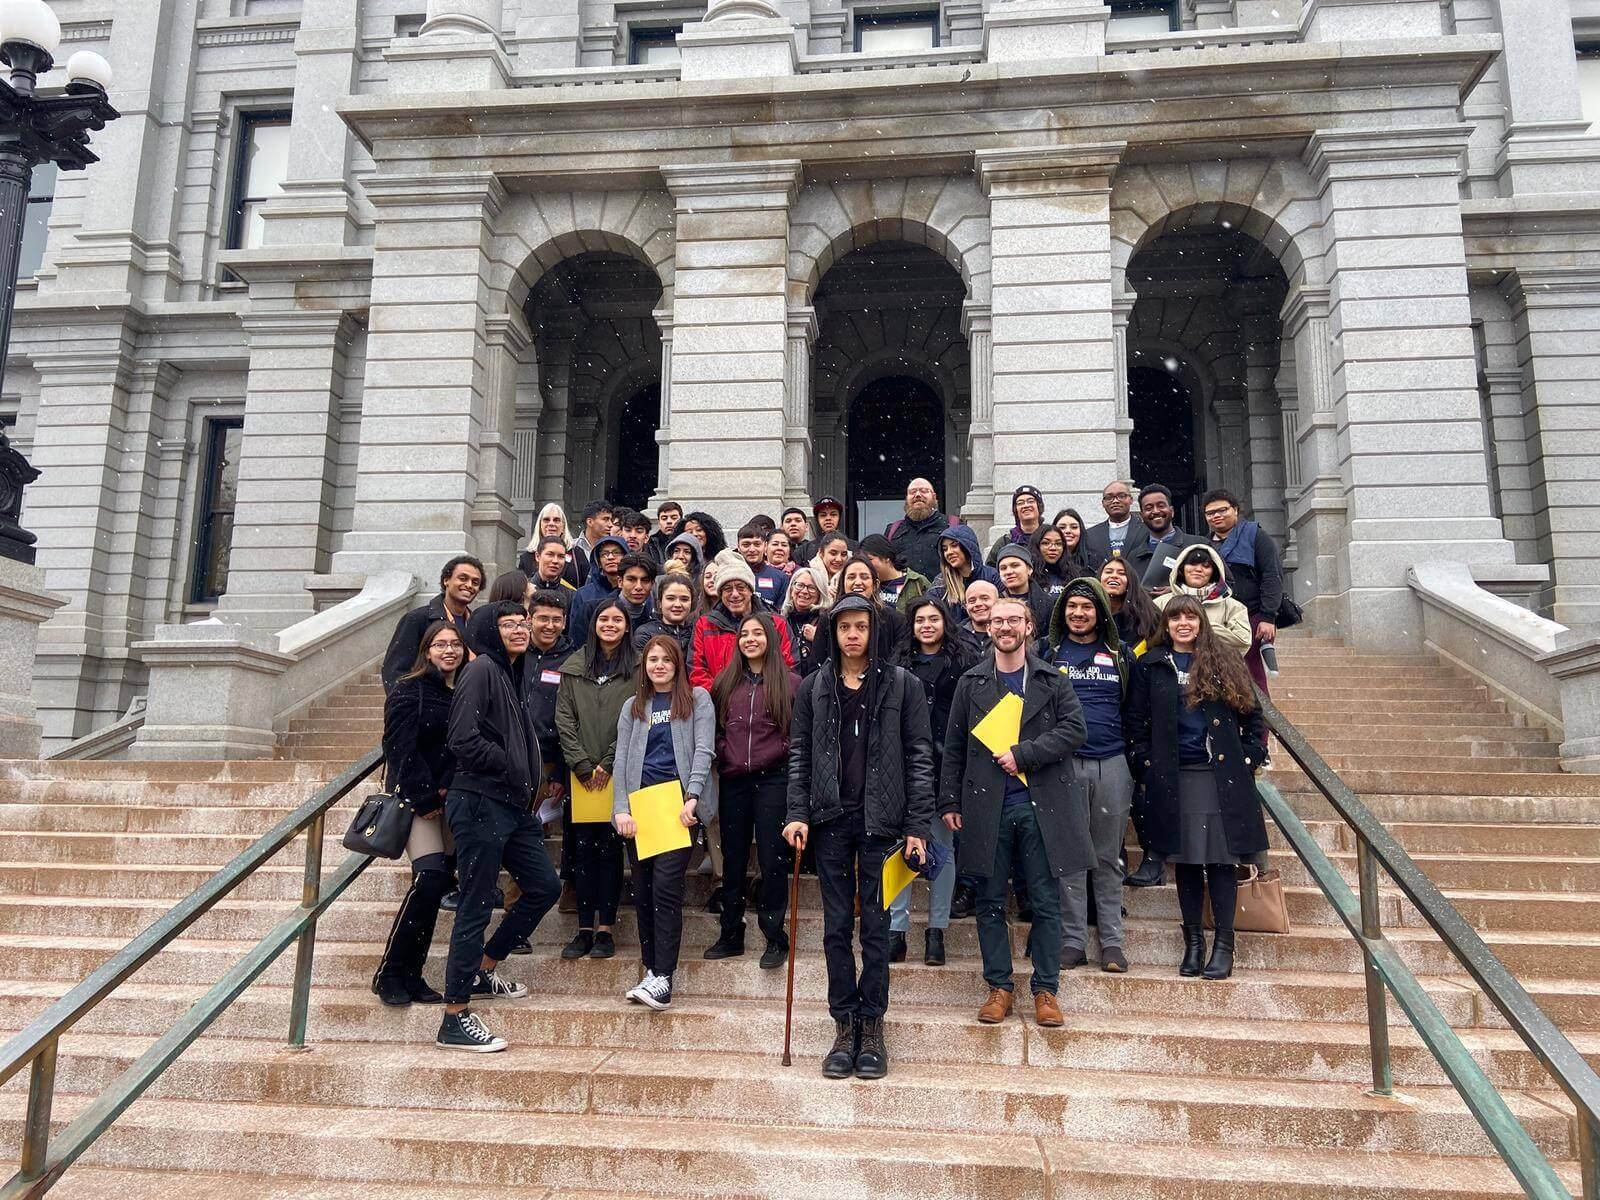 A large group stands on the steps of the Colorado state capitol building